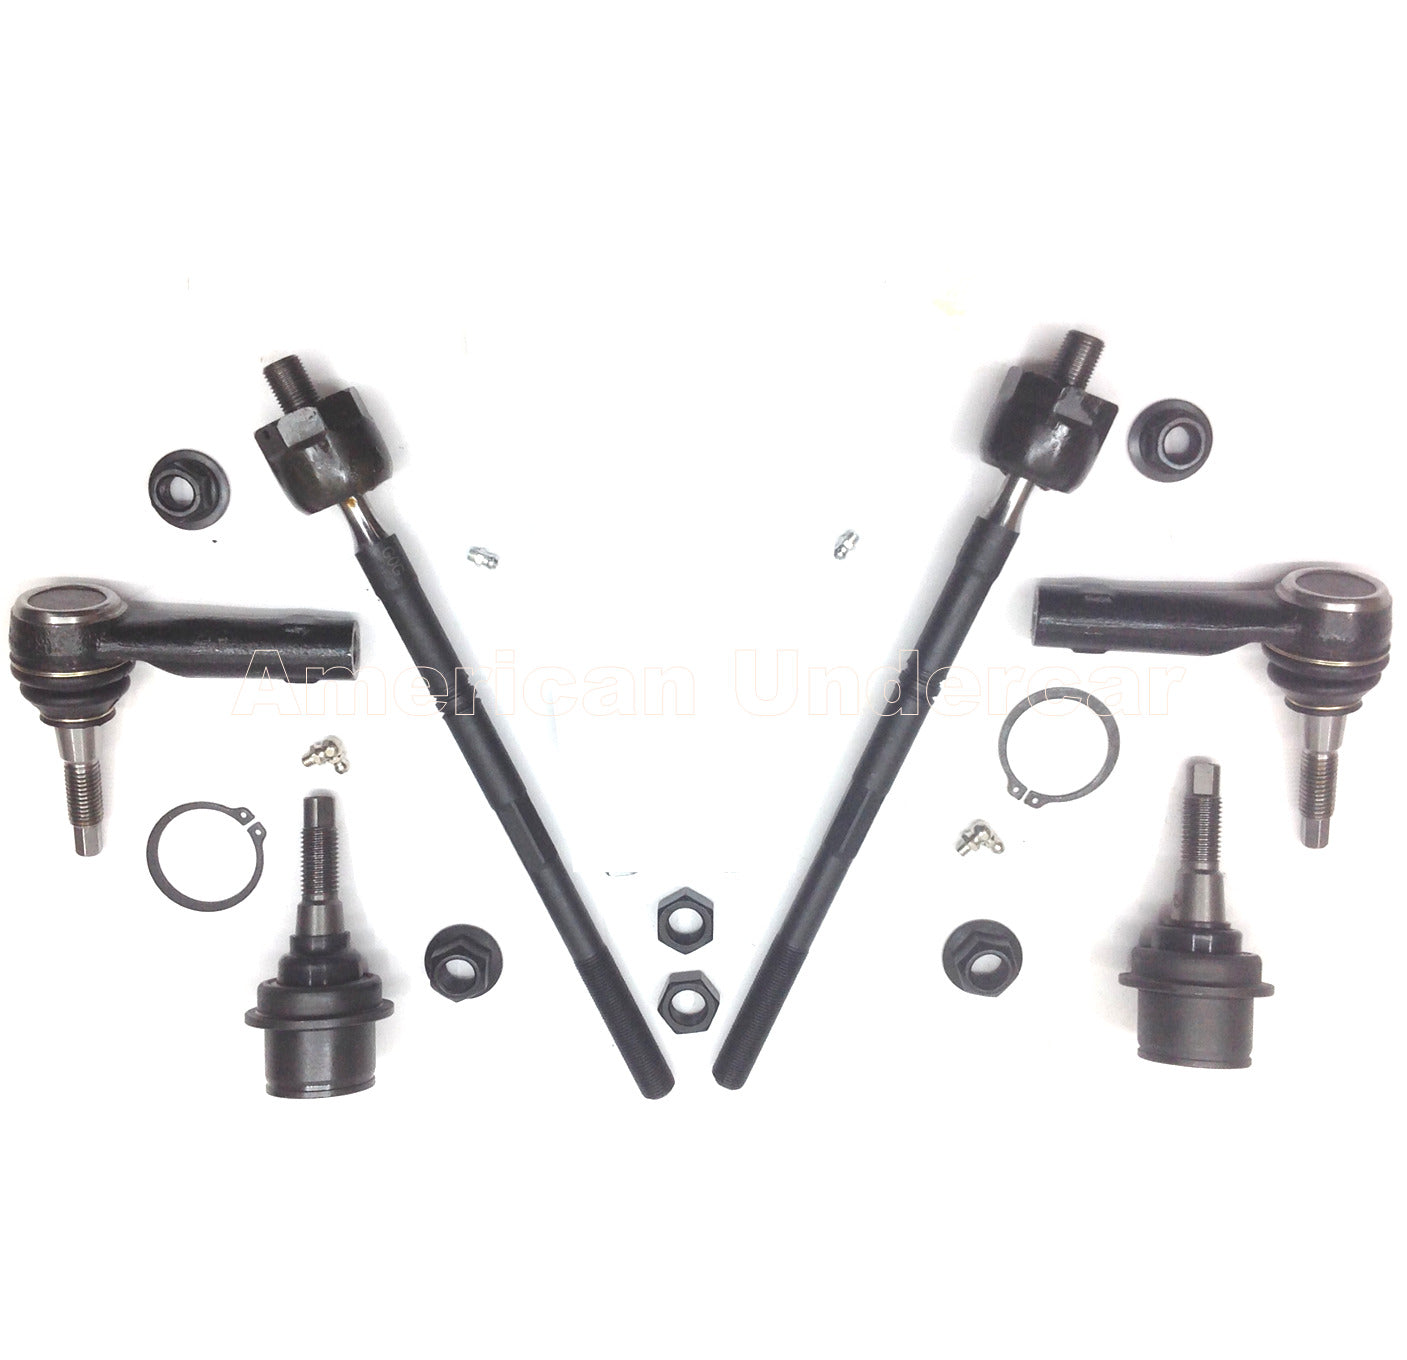 Lifetime Lower Ball Joints Tie Rod Steering Kit for 2009-2014 Ford F150 2WD